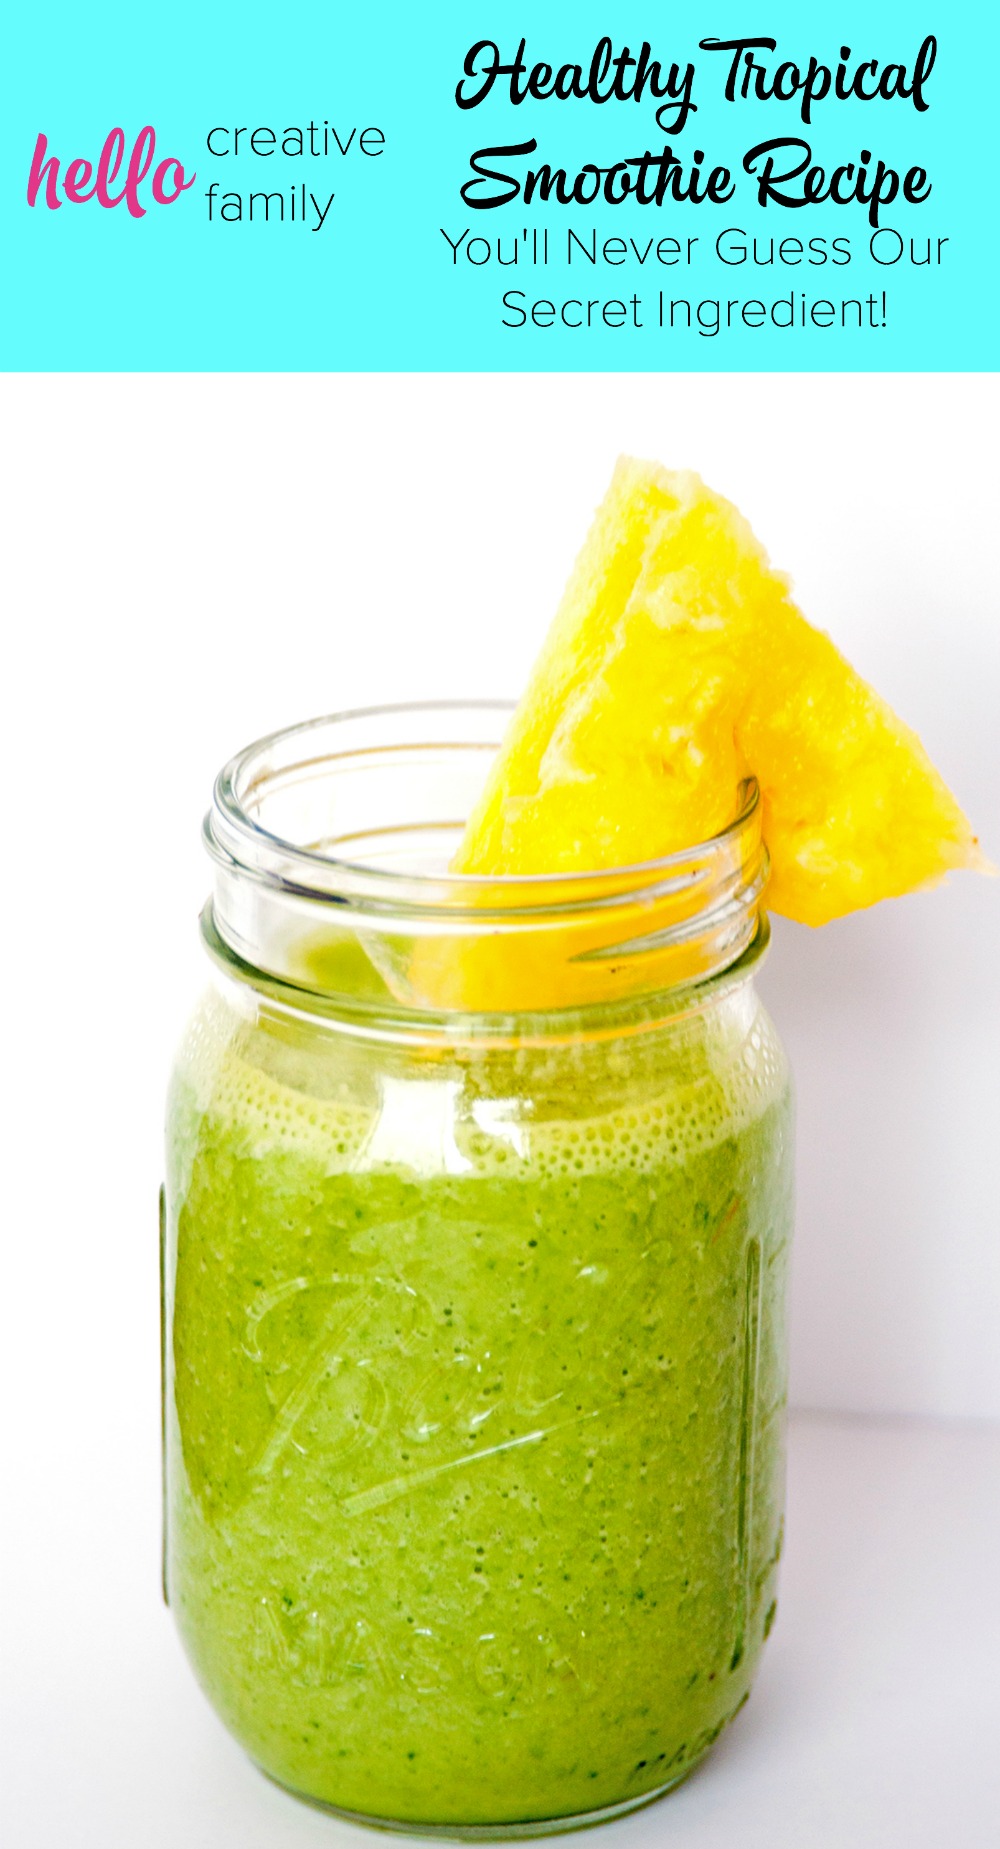 http://hellocreativefamily.com/healthy-tropical-smoothie-recipe/